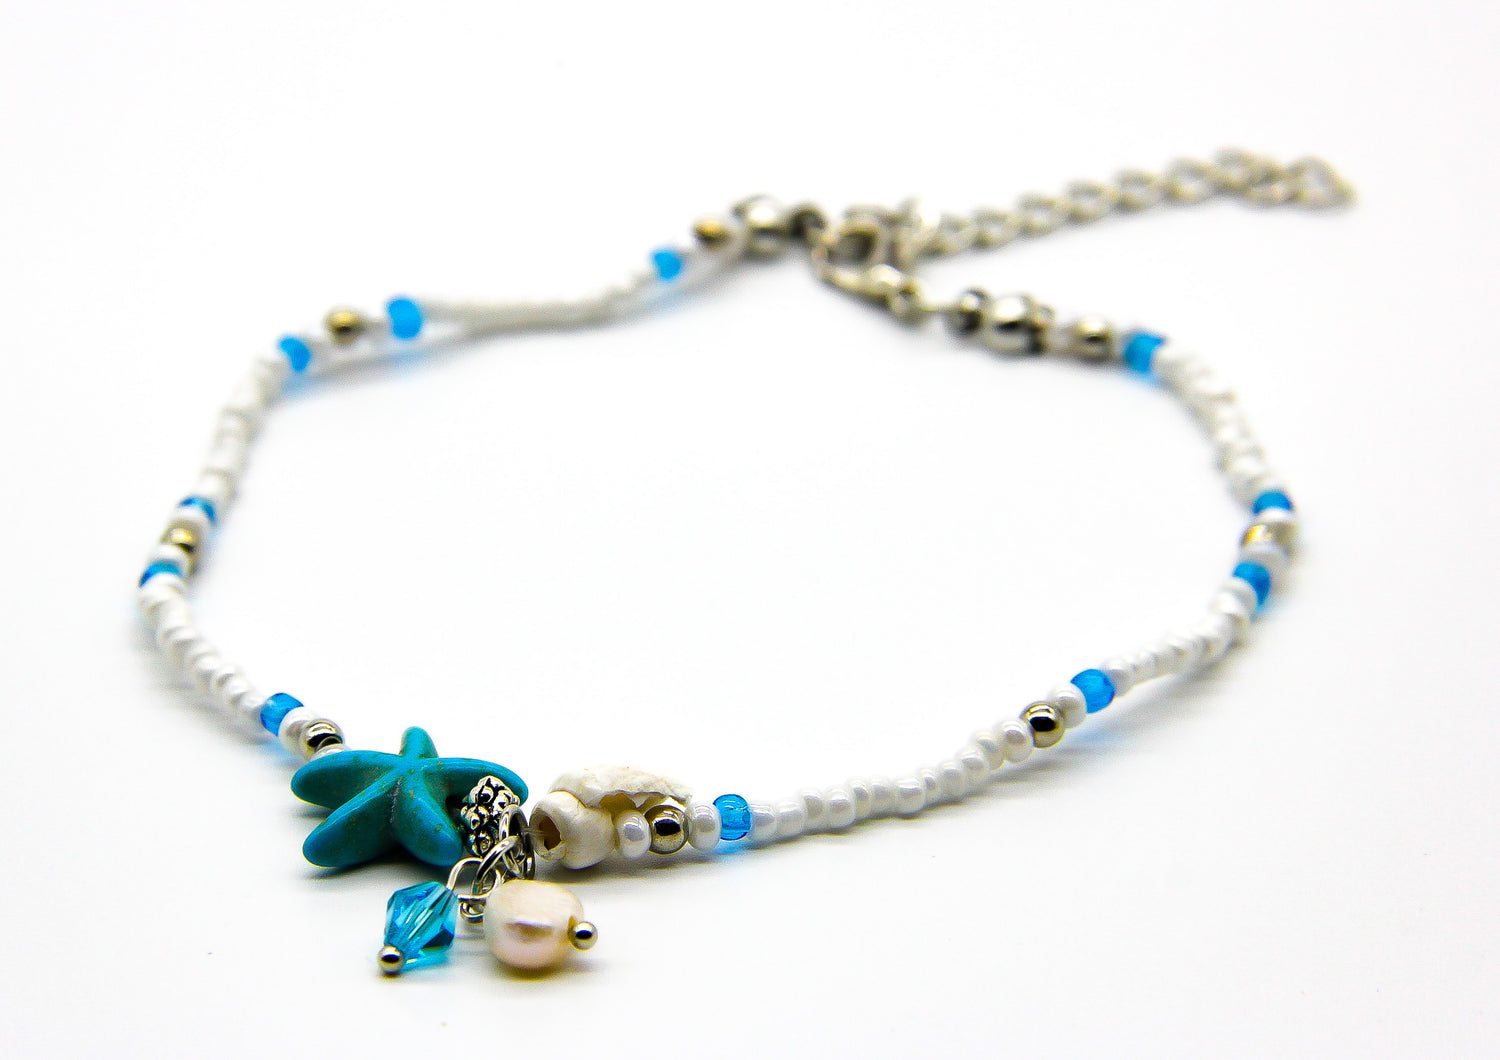 Beaded beach anklet with turquoise starfish pendant. 